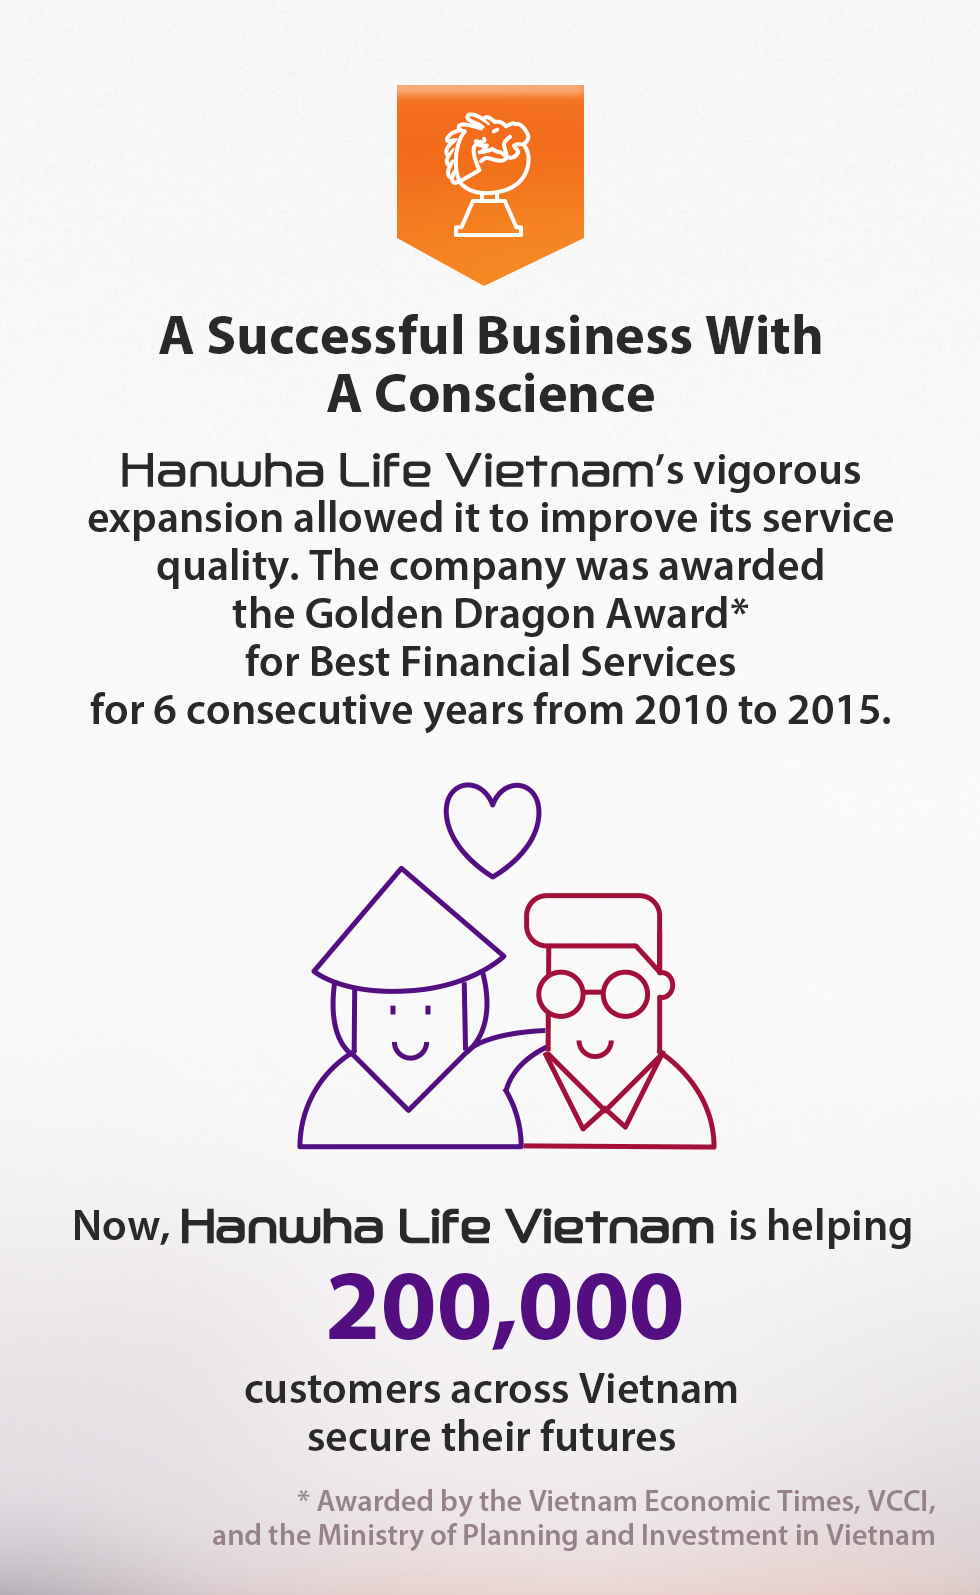 A Successful Business With A Conscience : Hanwha Life Vietnam’s vigorous expansion allowed it to improve its service quality. The company was awarded the Golden Dragon Award* for Best Financial Services for 6 consecutive years from 2010 to 2015. Now, Hanwha Life Vietnam is helping 200,000 customers across Vietnam secure their futures. * Awarded by the Vietnam Economic Times, VCCI, and the Ministry of Planning and Investment in Vietnam